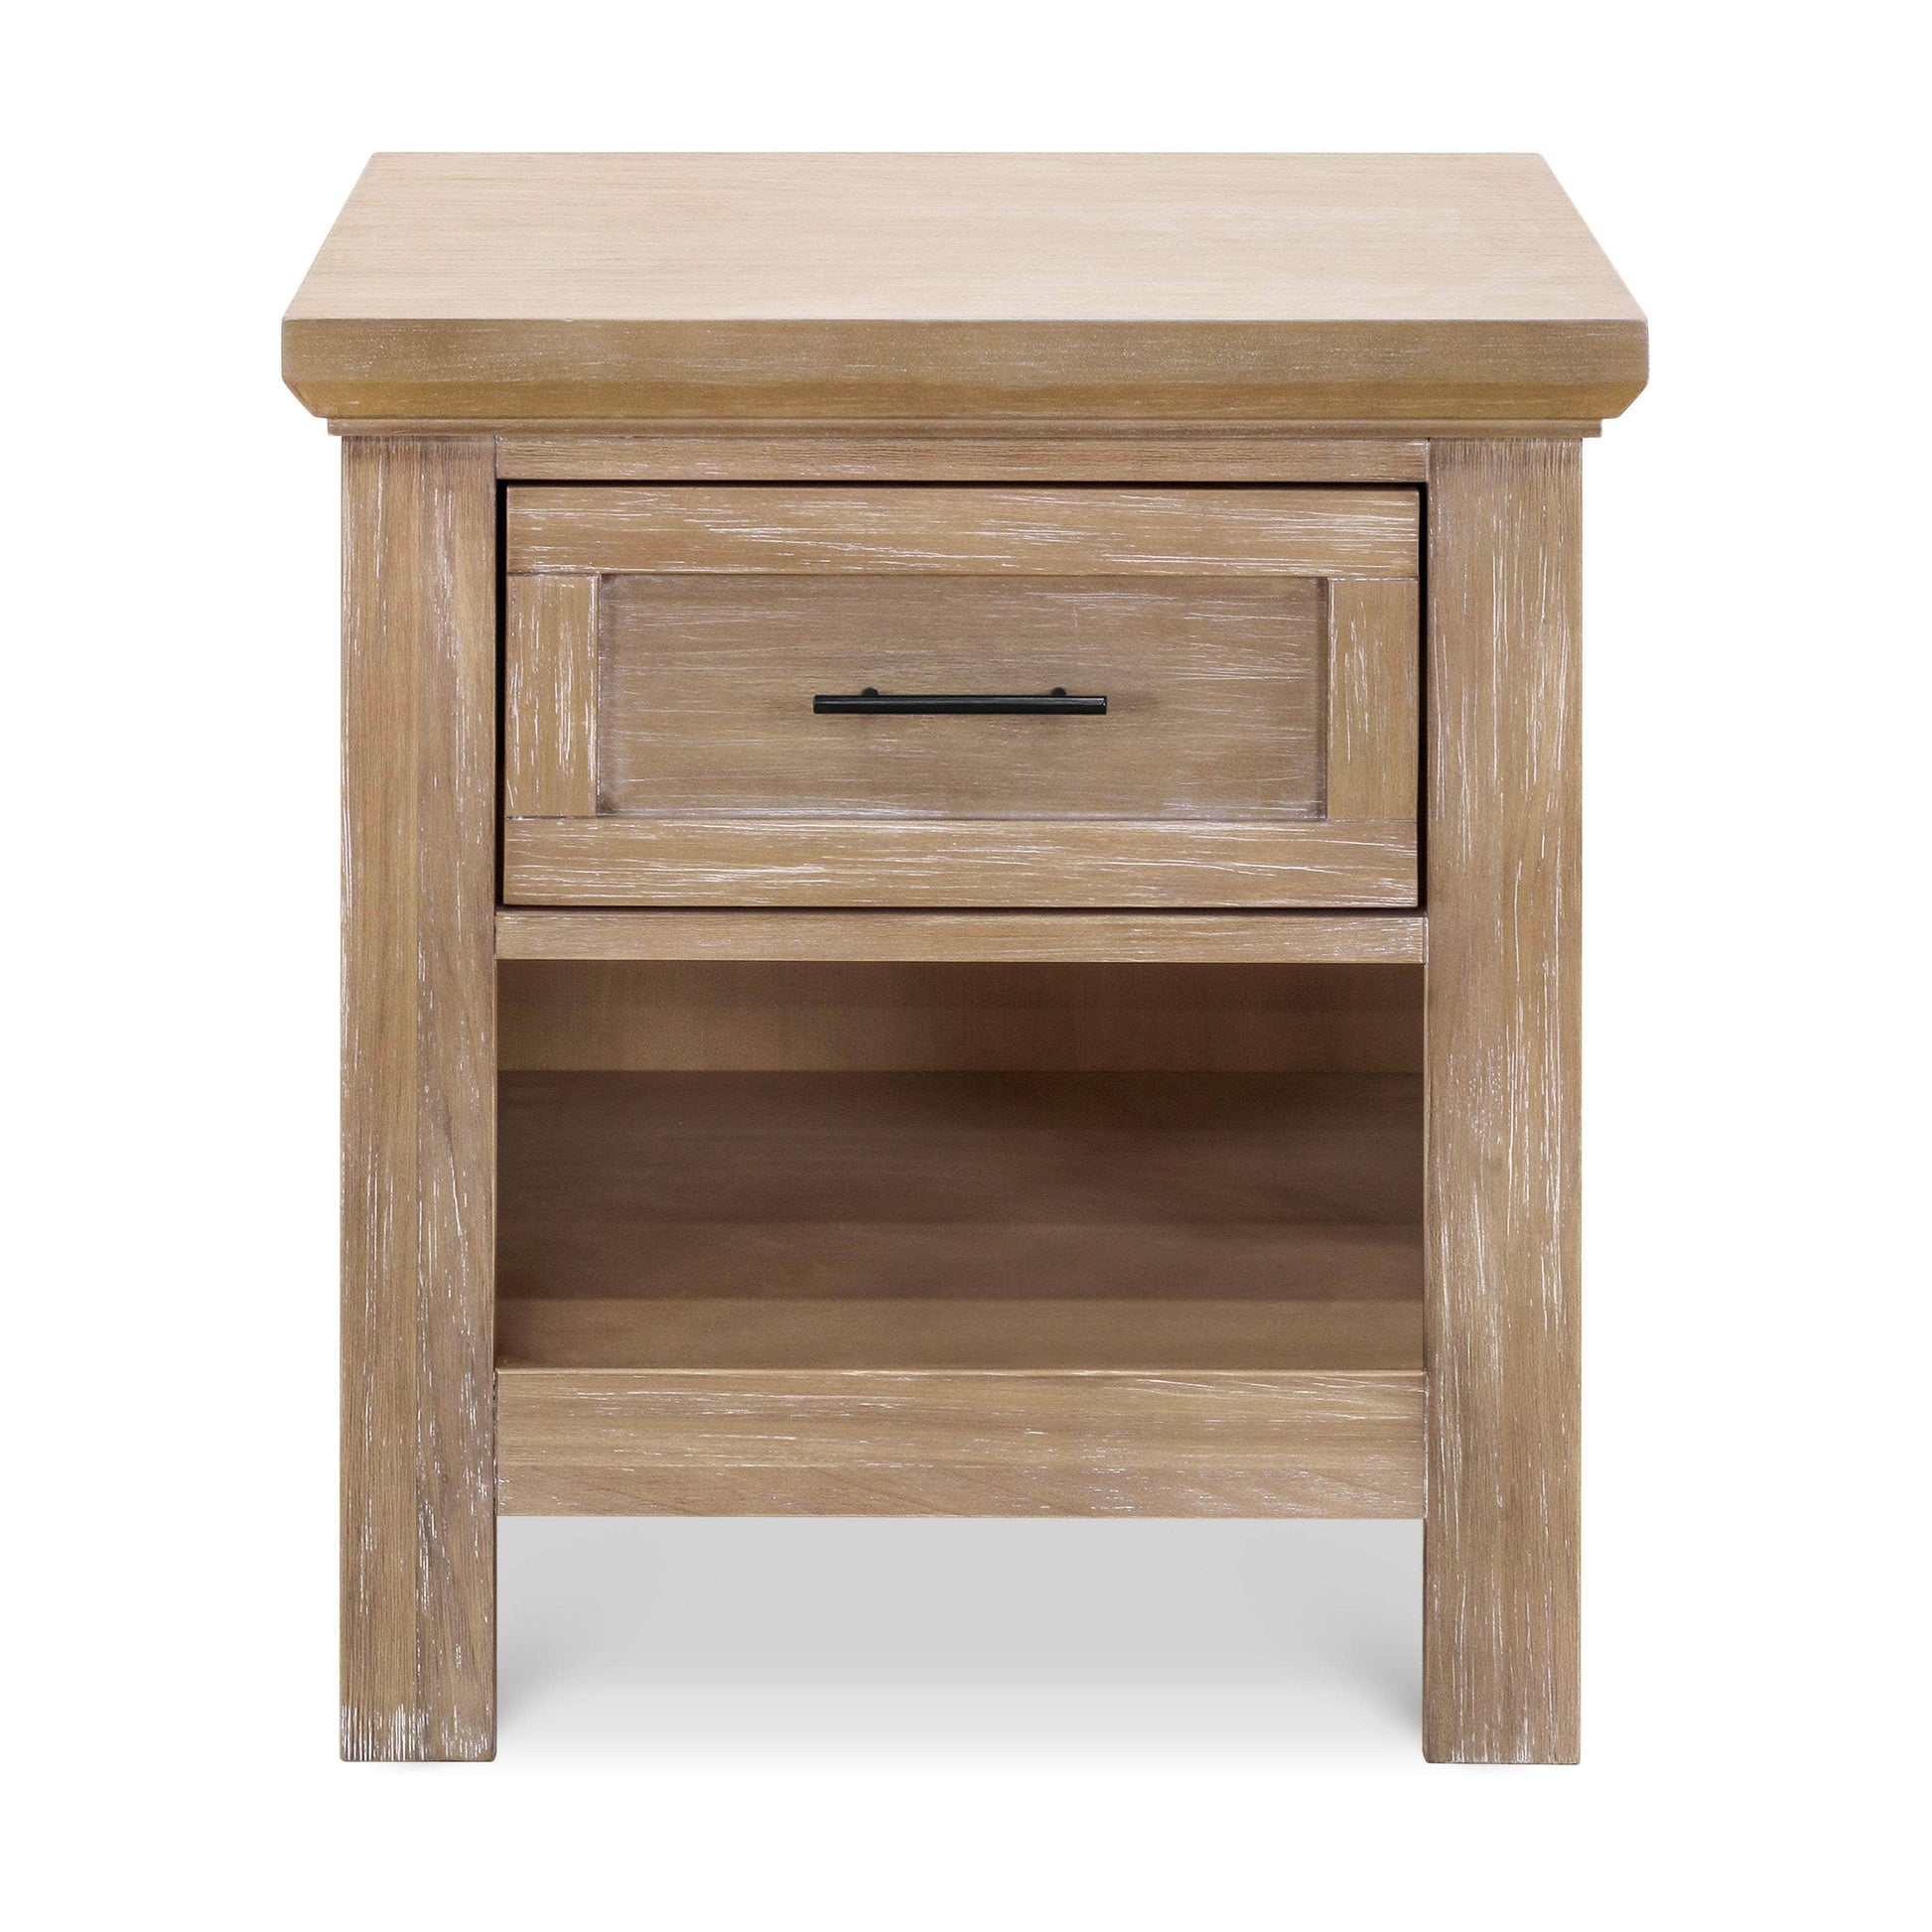 B14560DF,Emory Farmhouse Nightstand in Driftwood Finish